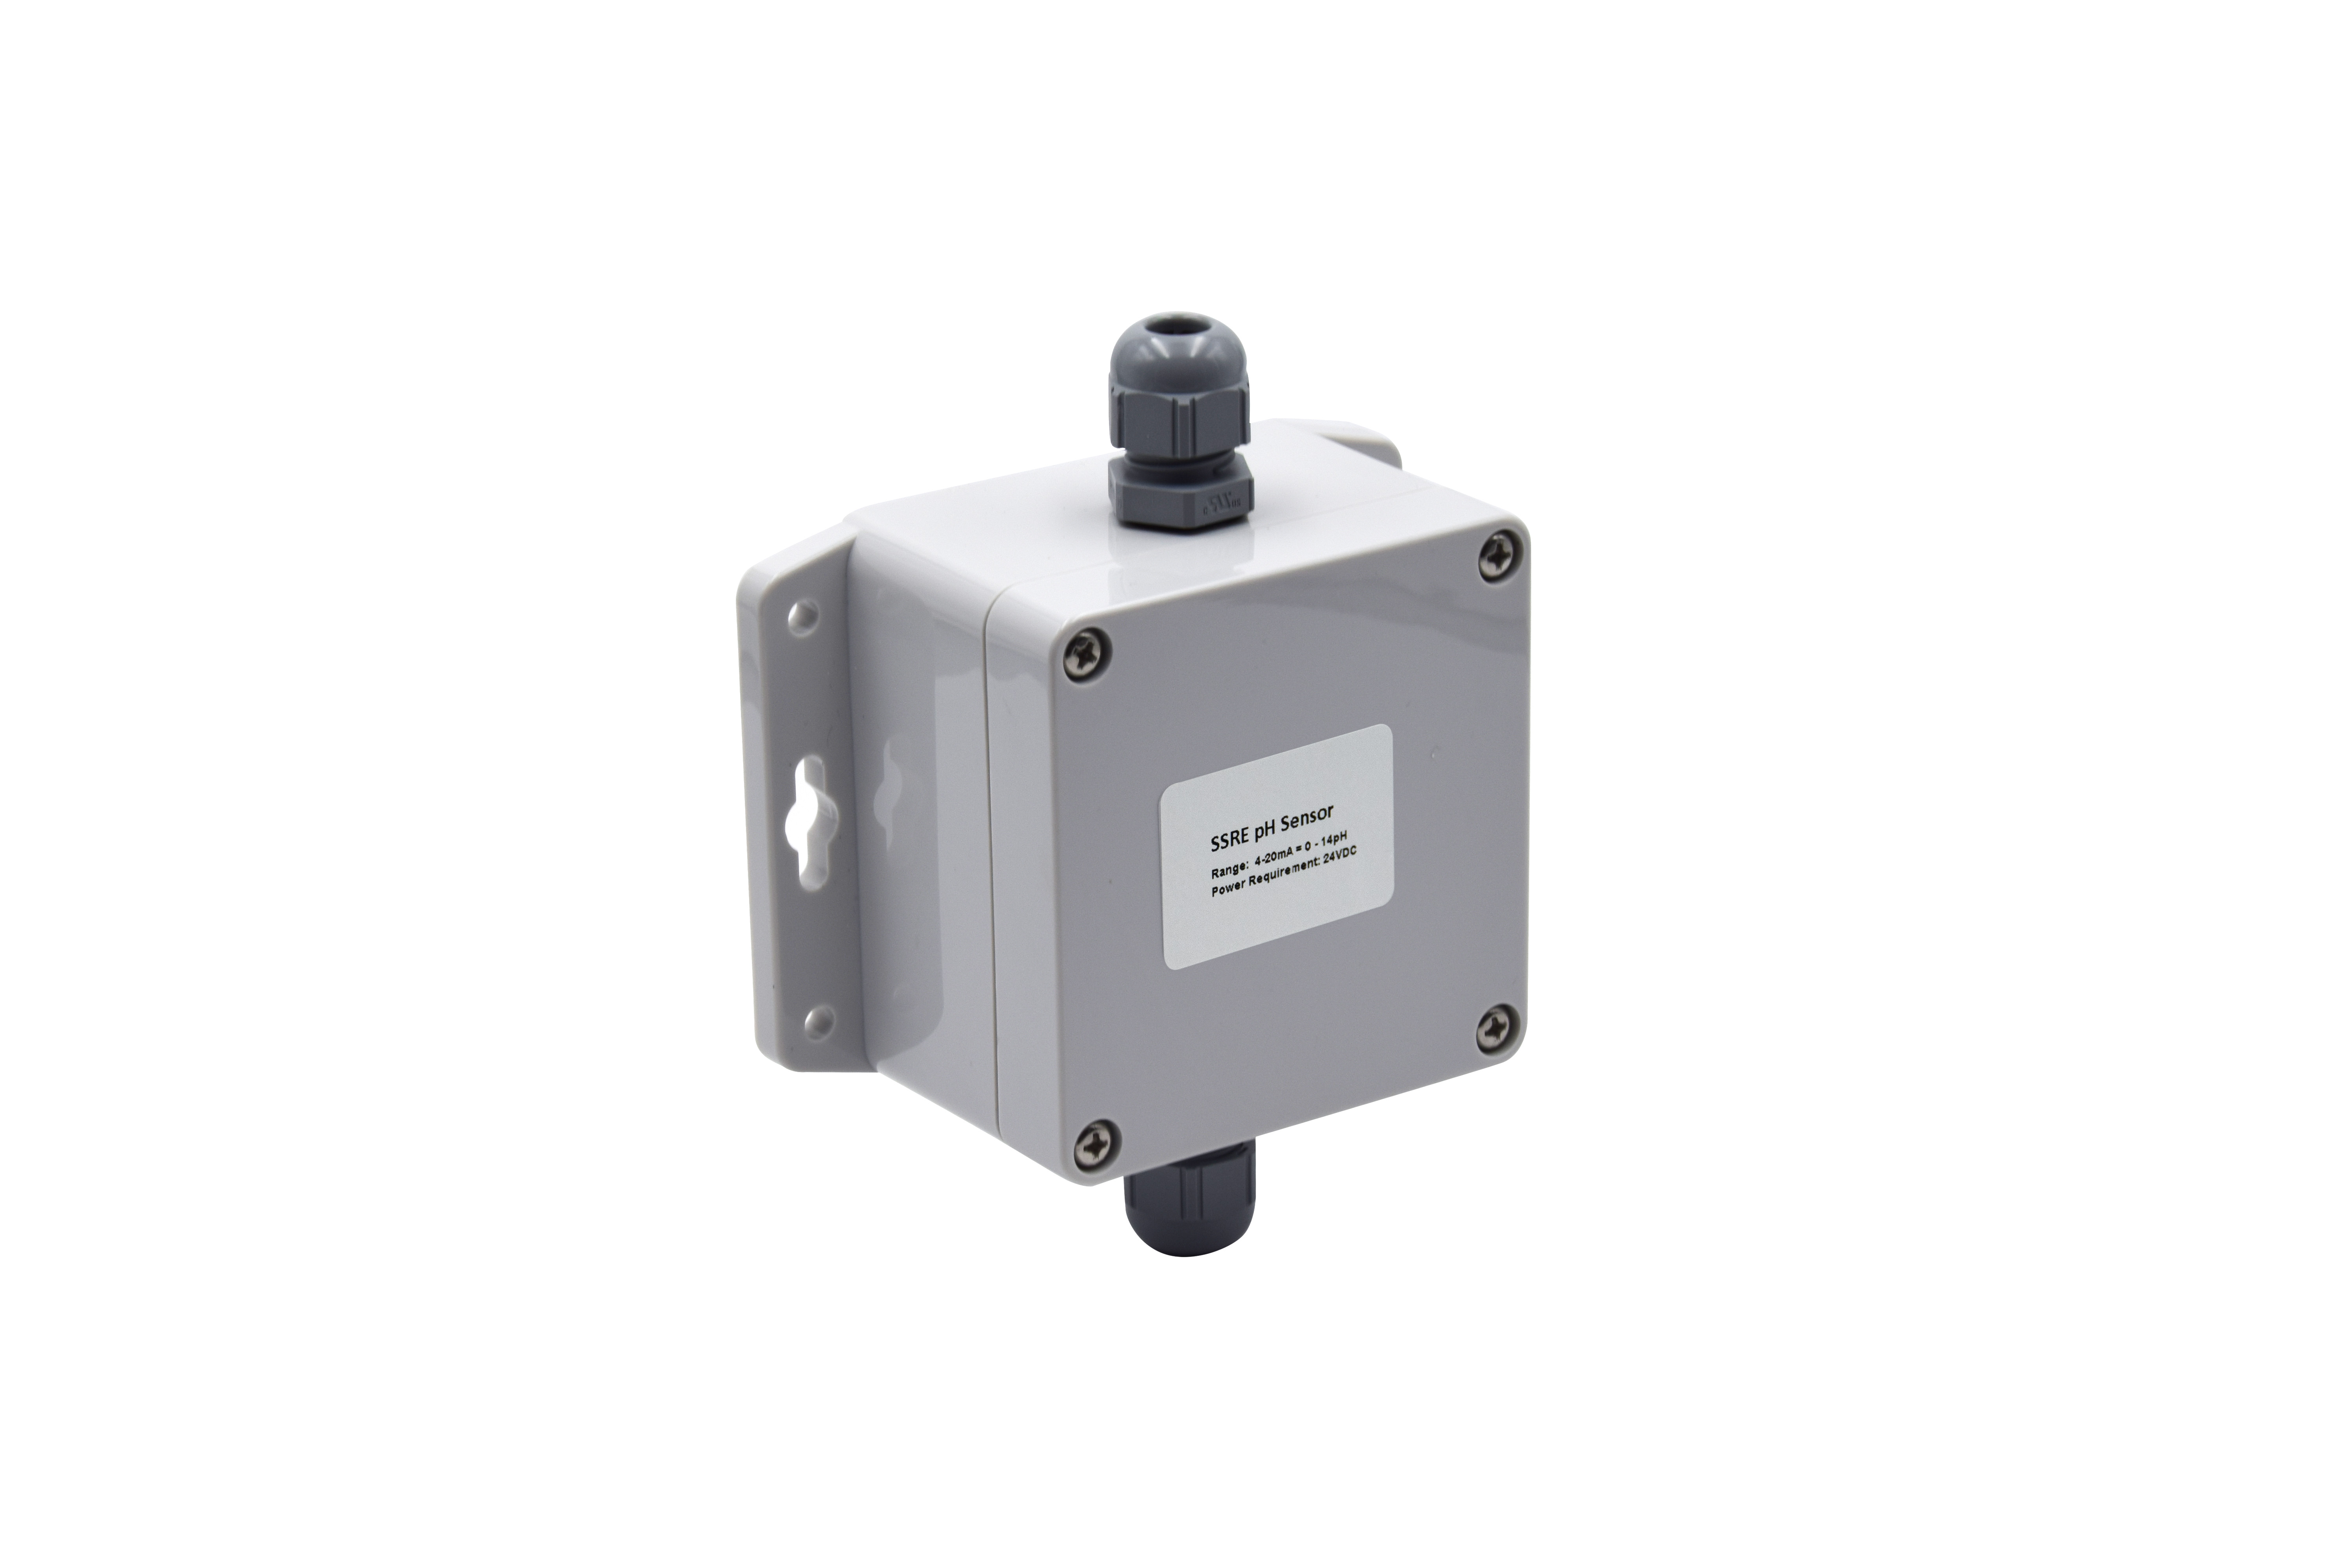 NeoTec signal converter 4-20 mA for pH and ORP electrodes in enclosure(wall mounting)